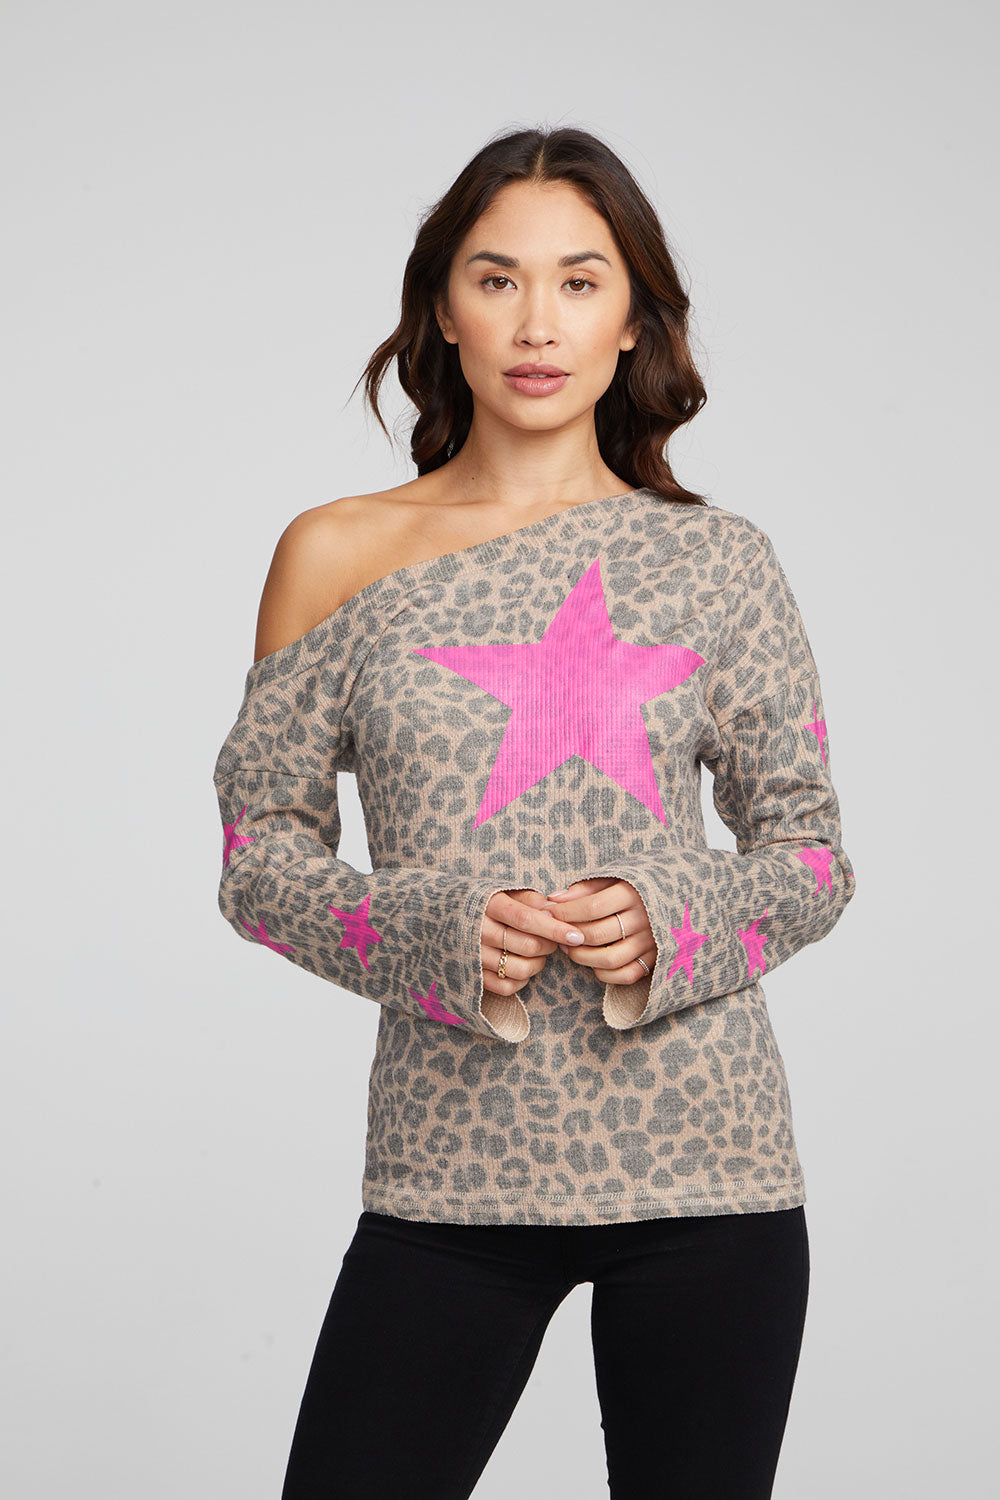 Leopard Star Long Sleeve WOMENS chaserbrand